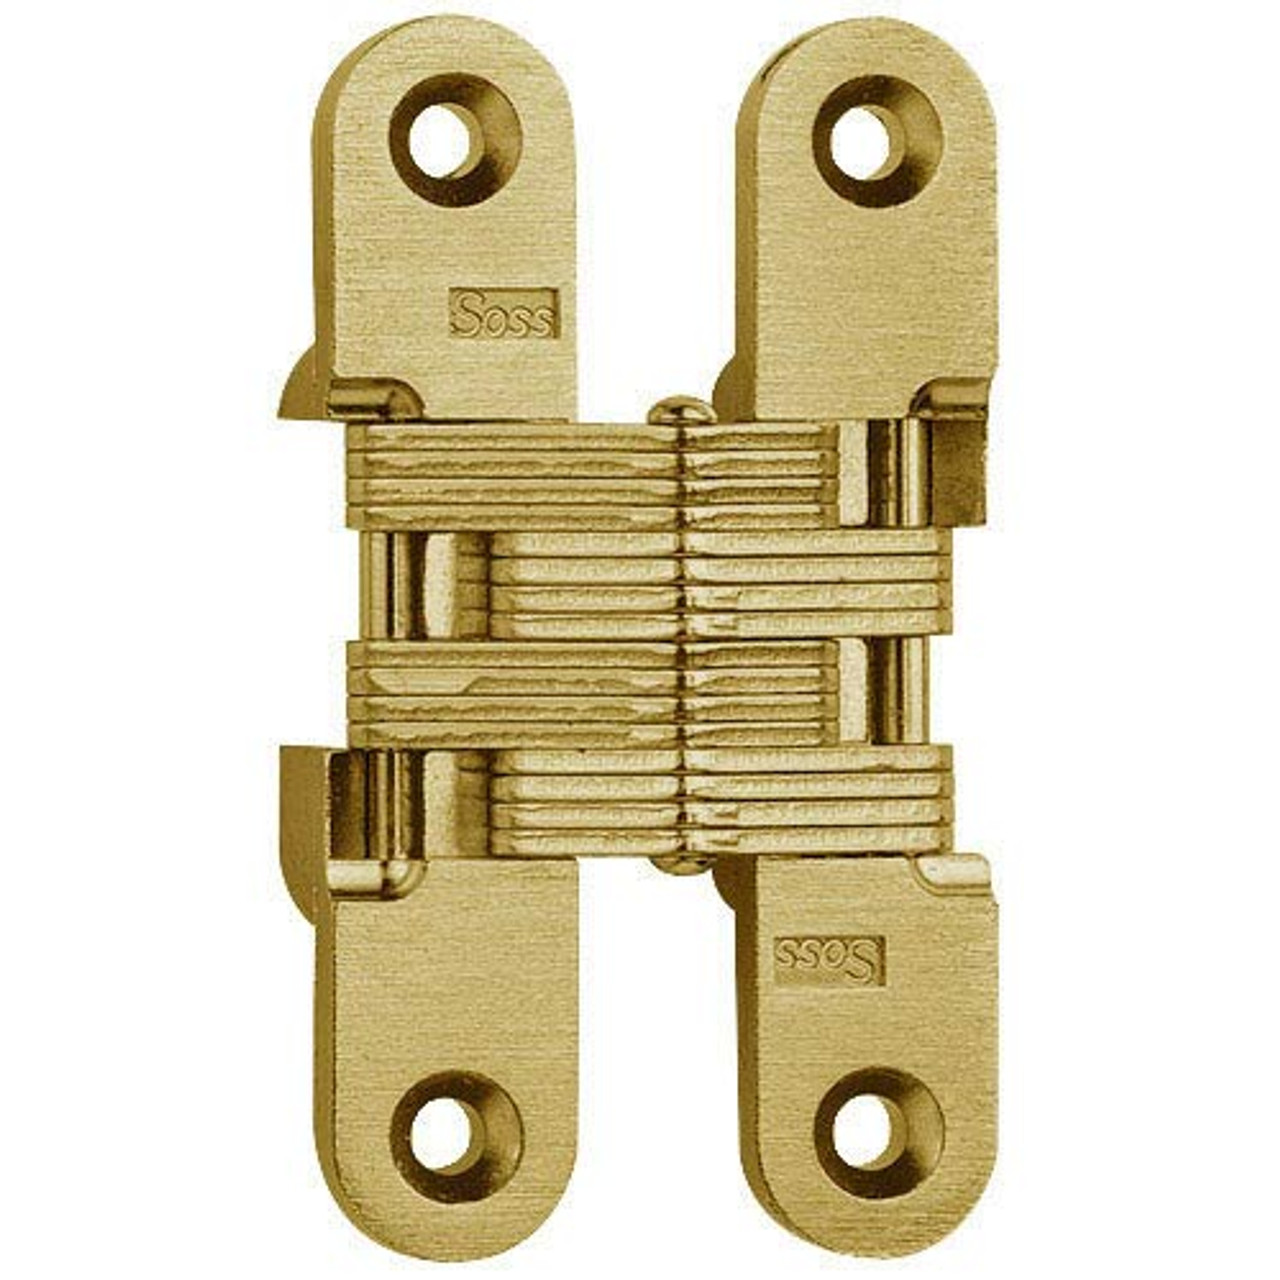 216-US3 Soss Invisible Hinge in Bright Brass Finish